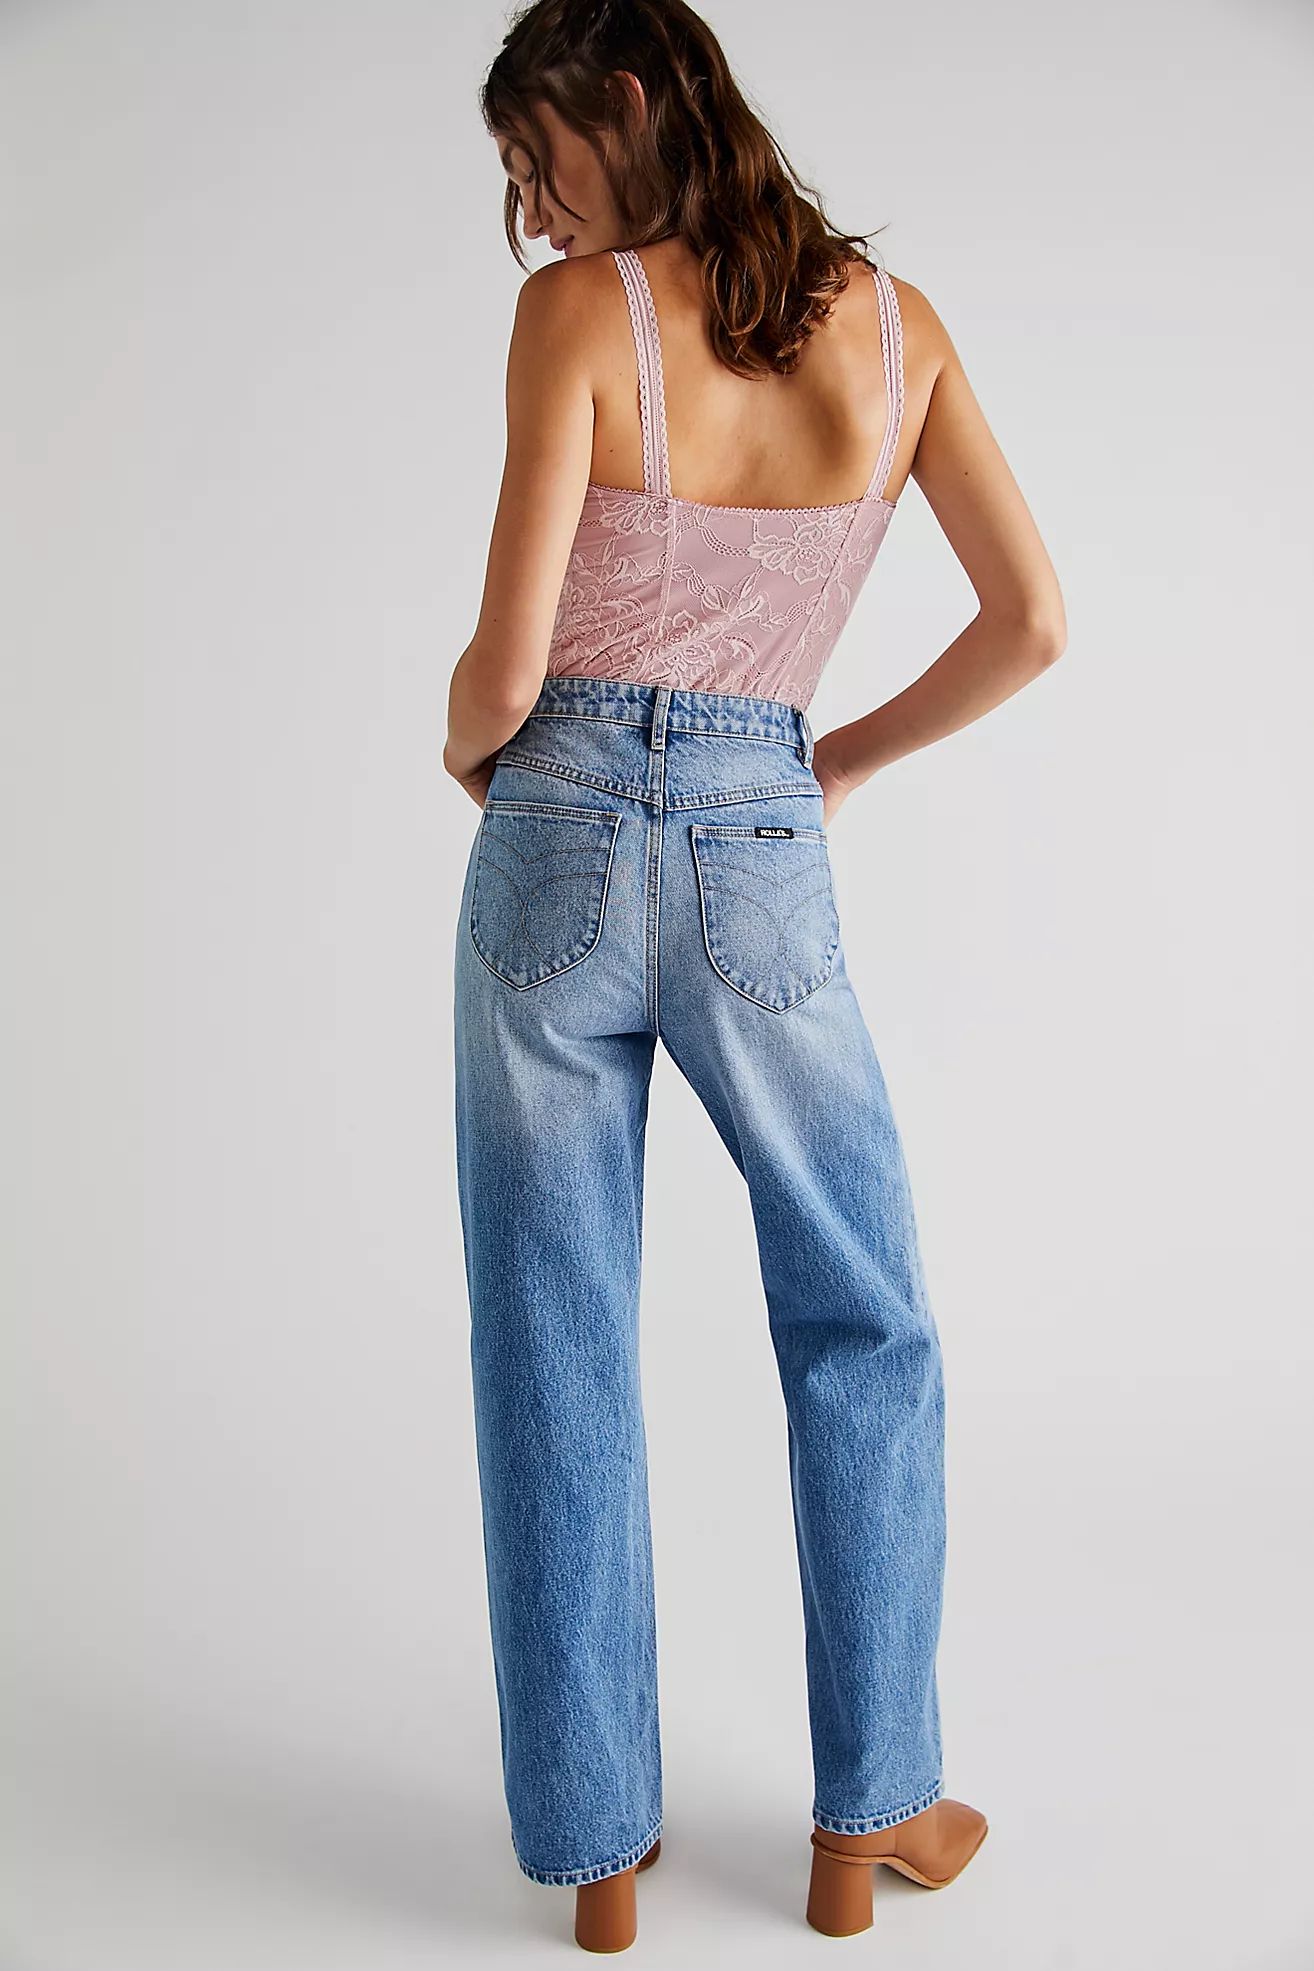 Rolla's Heidi Recycled Jeans | Free People (Global - UK&FR Excluded)